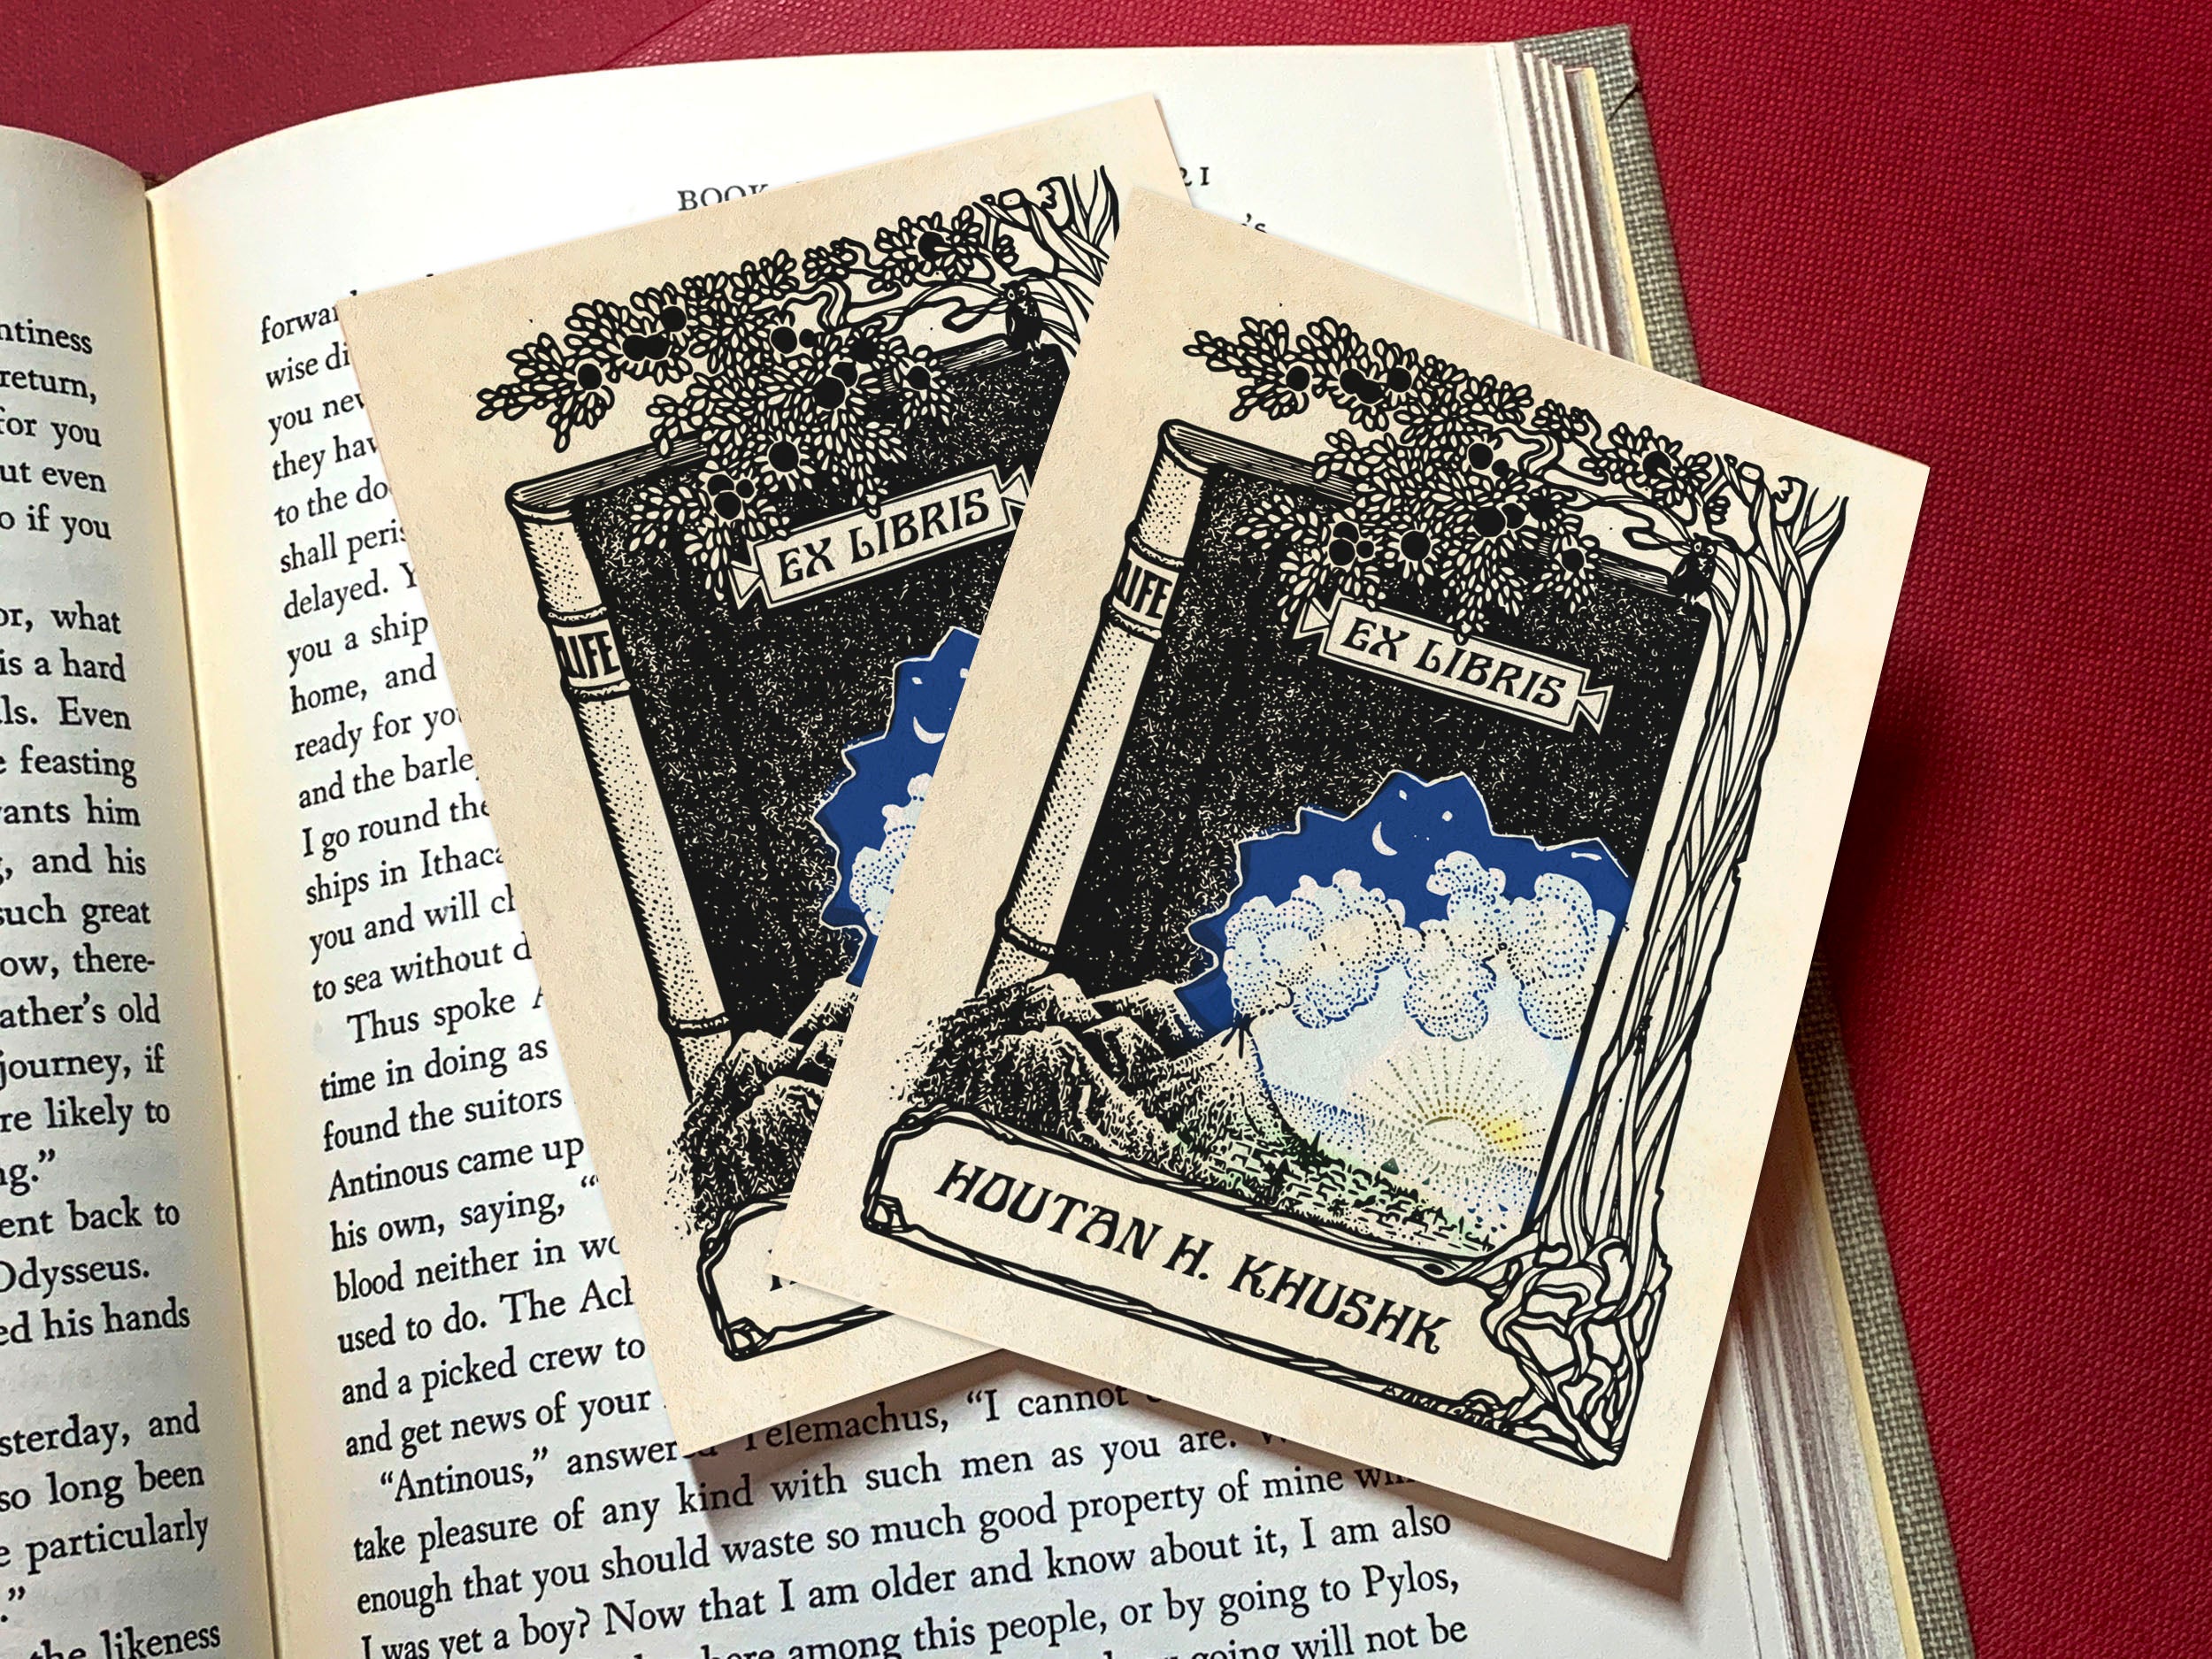 Book of Life, Personalized Ex-Libris Bookplates, Crafted on Traditional Gummed Paper, 3in x 4in, Set of 30